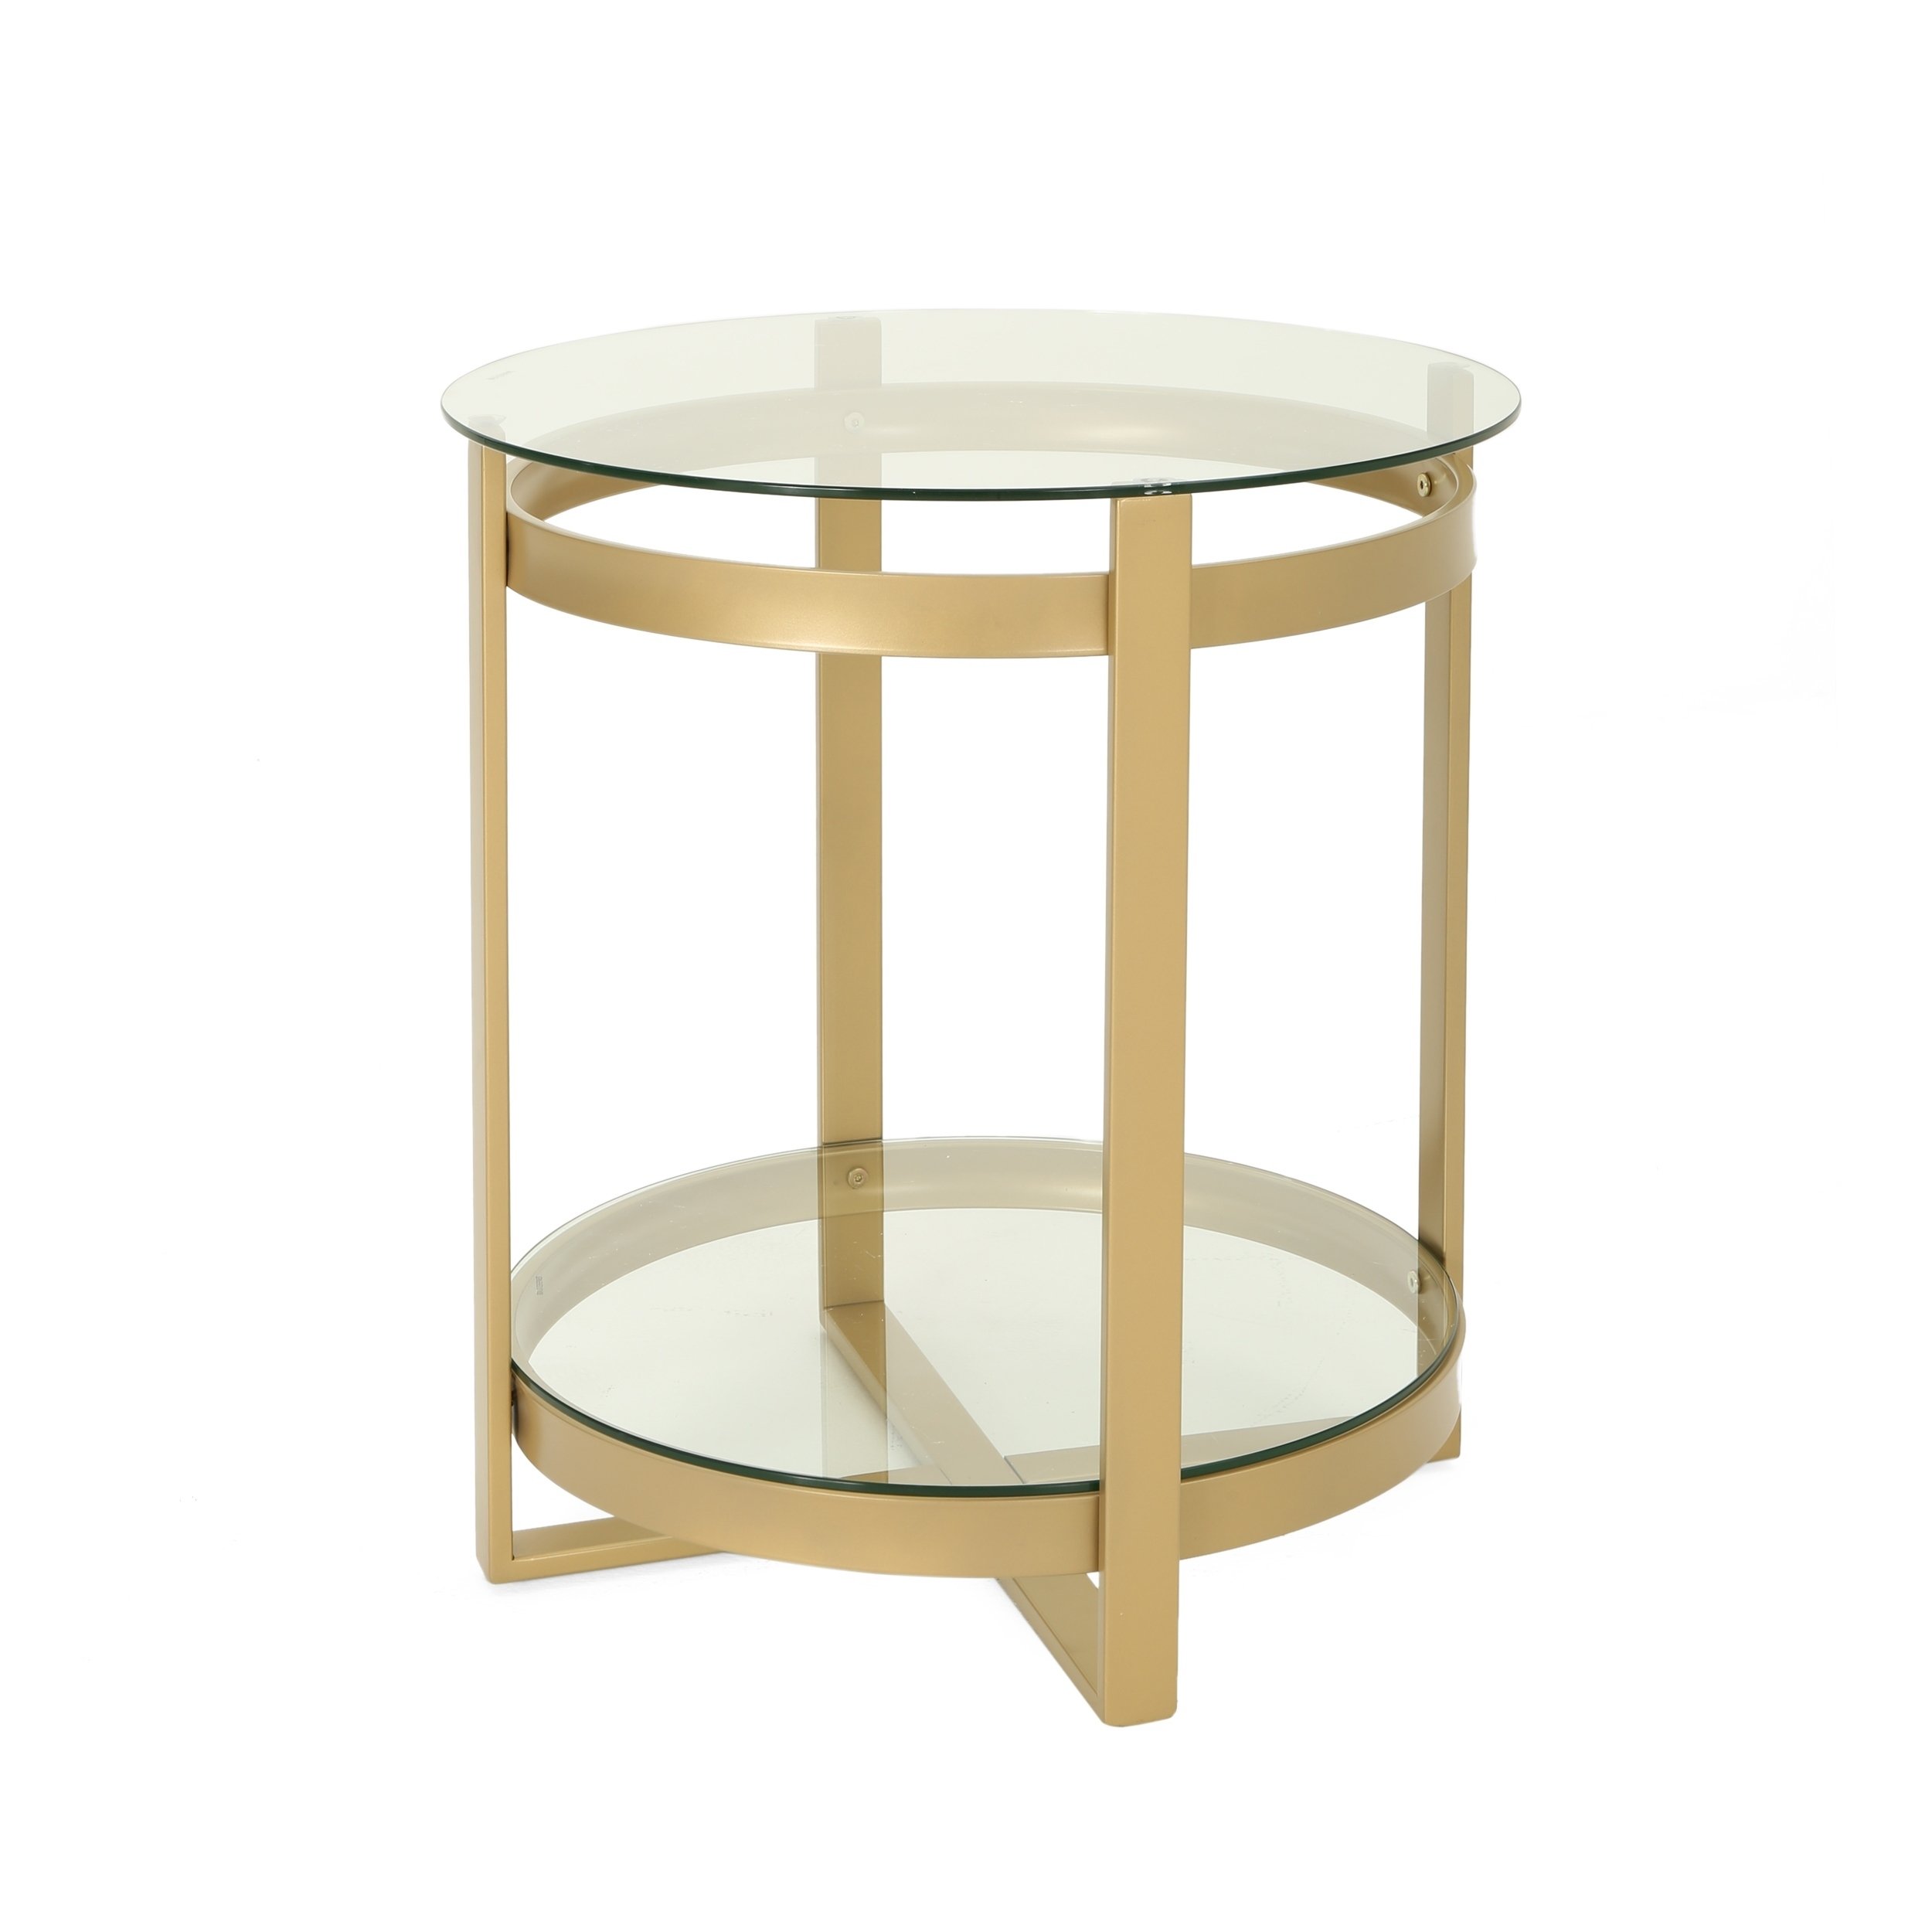 solidago modern round tempered glass coffee with iron frame christopher knight home accent table details about tiffany floor lamps cream occasional chair nate berkus target unique